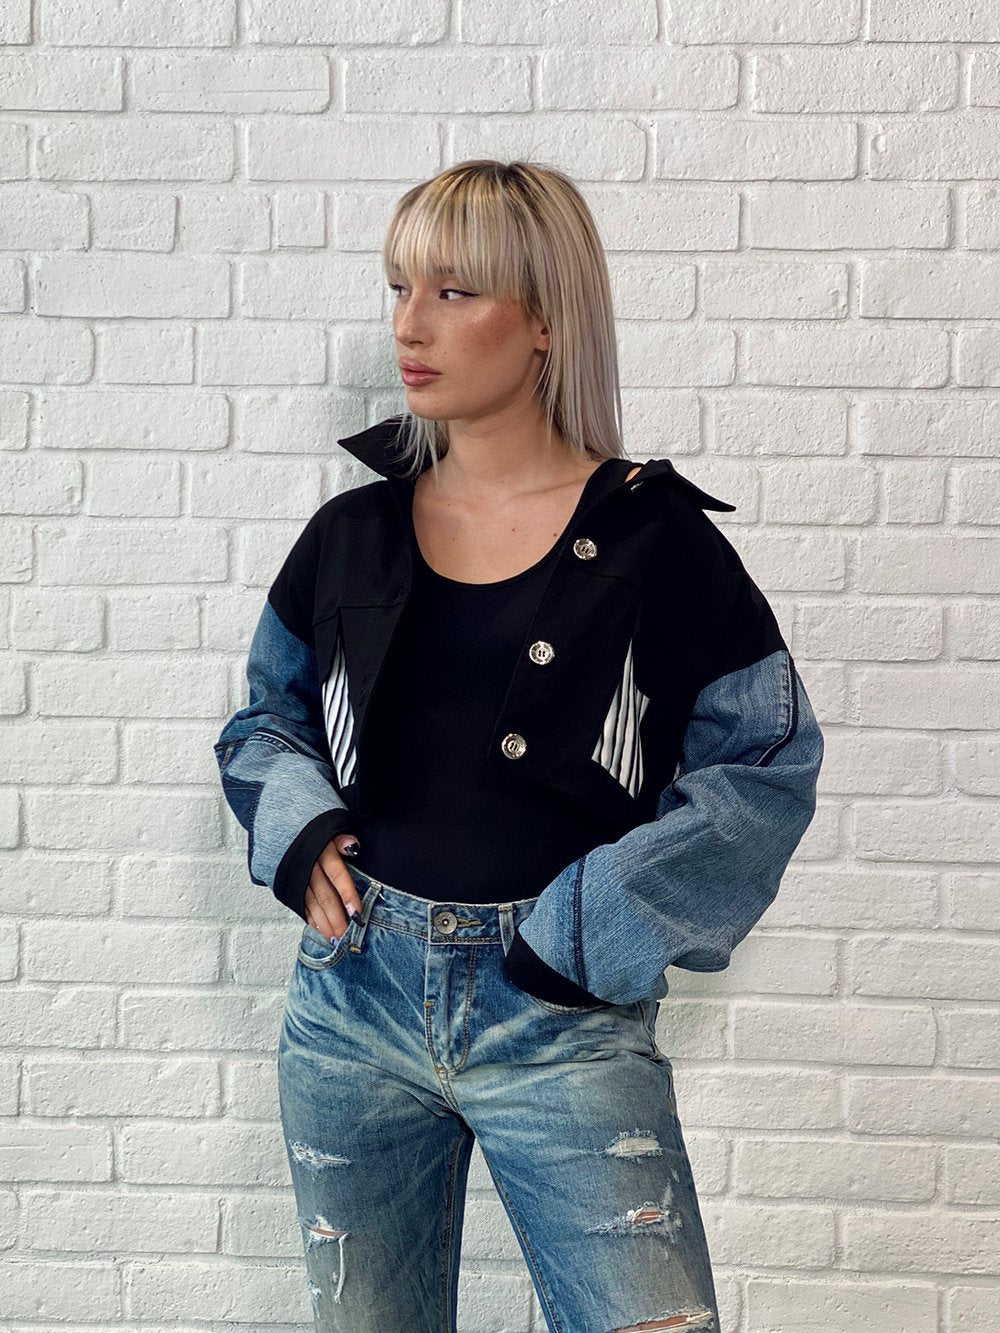 Crop Jacket - Retro Roses Girls
This jacket from Rock ‘N Karma’s Fall 2020 Collection is a cool reinterpretation of popular oversized-dropped shoulder-cropped styles from the '90s, except in an unexpected lycra-denim mix that's comfortable and chic. What is even more eye-catching is the fabulous original motif. About Me 85% Rayon, 15% Lycra “Miracle Fabric” (thick) 100% Recycled Remix Denim Sleeves 2 way stretch for a move-with-you-feel Hand Painted Original Design Designed for an oversized fit Fabric resil